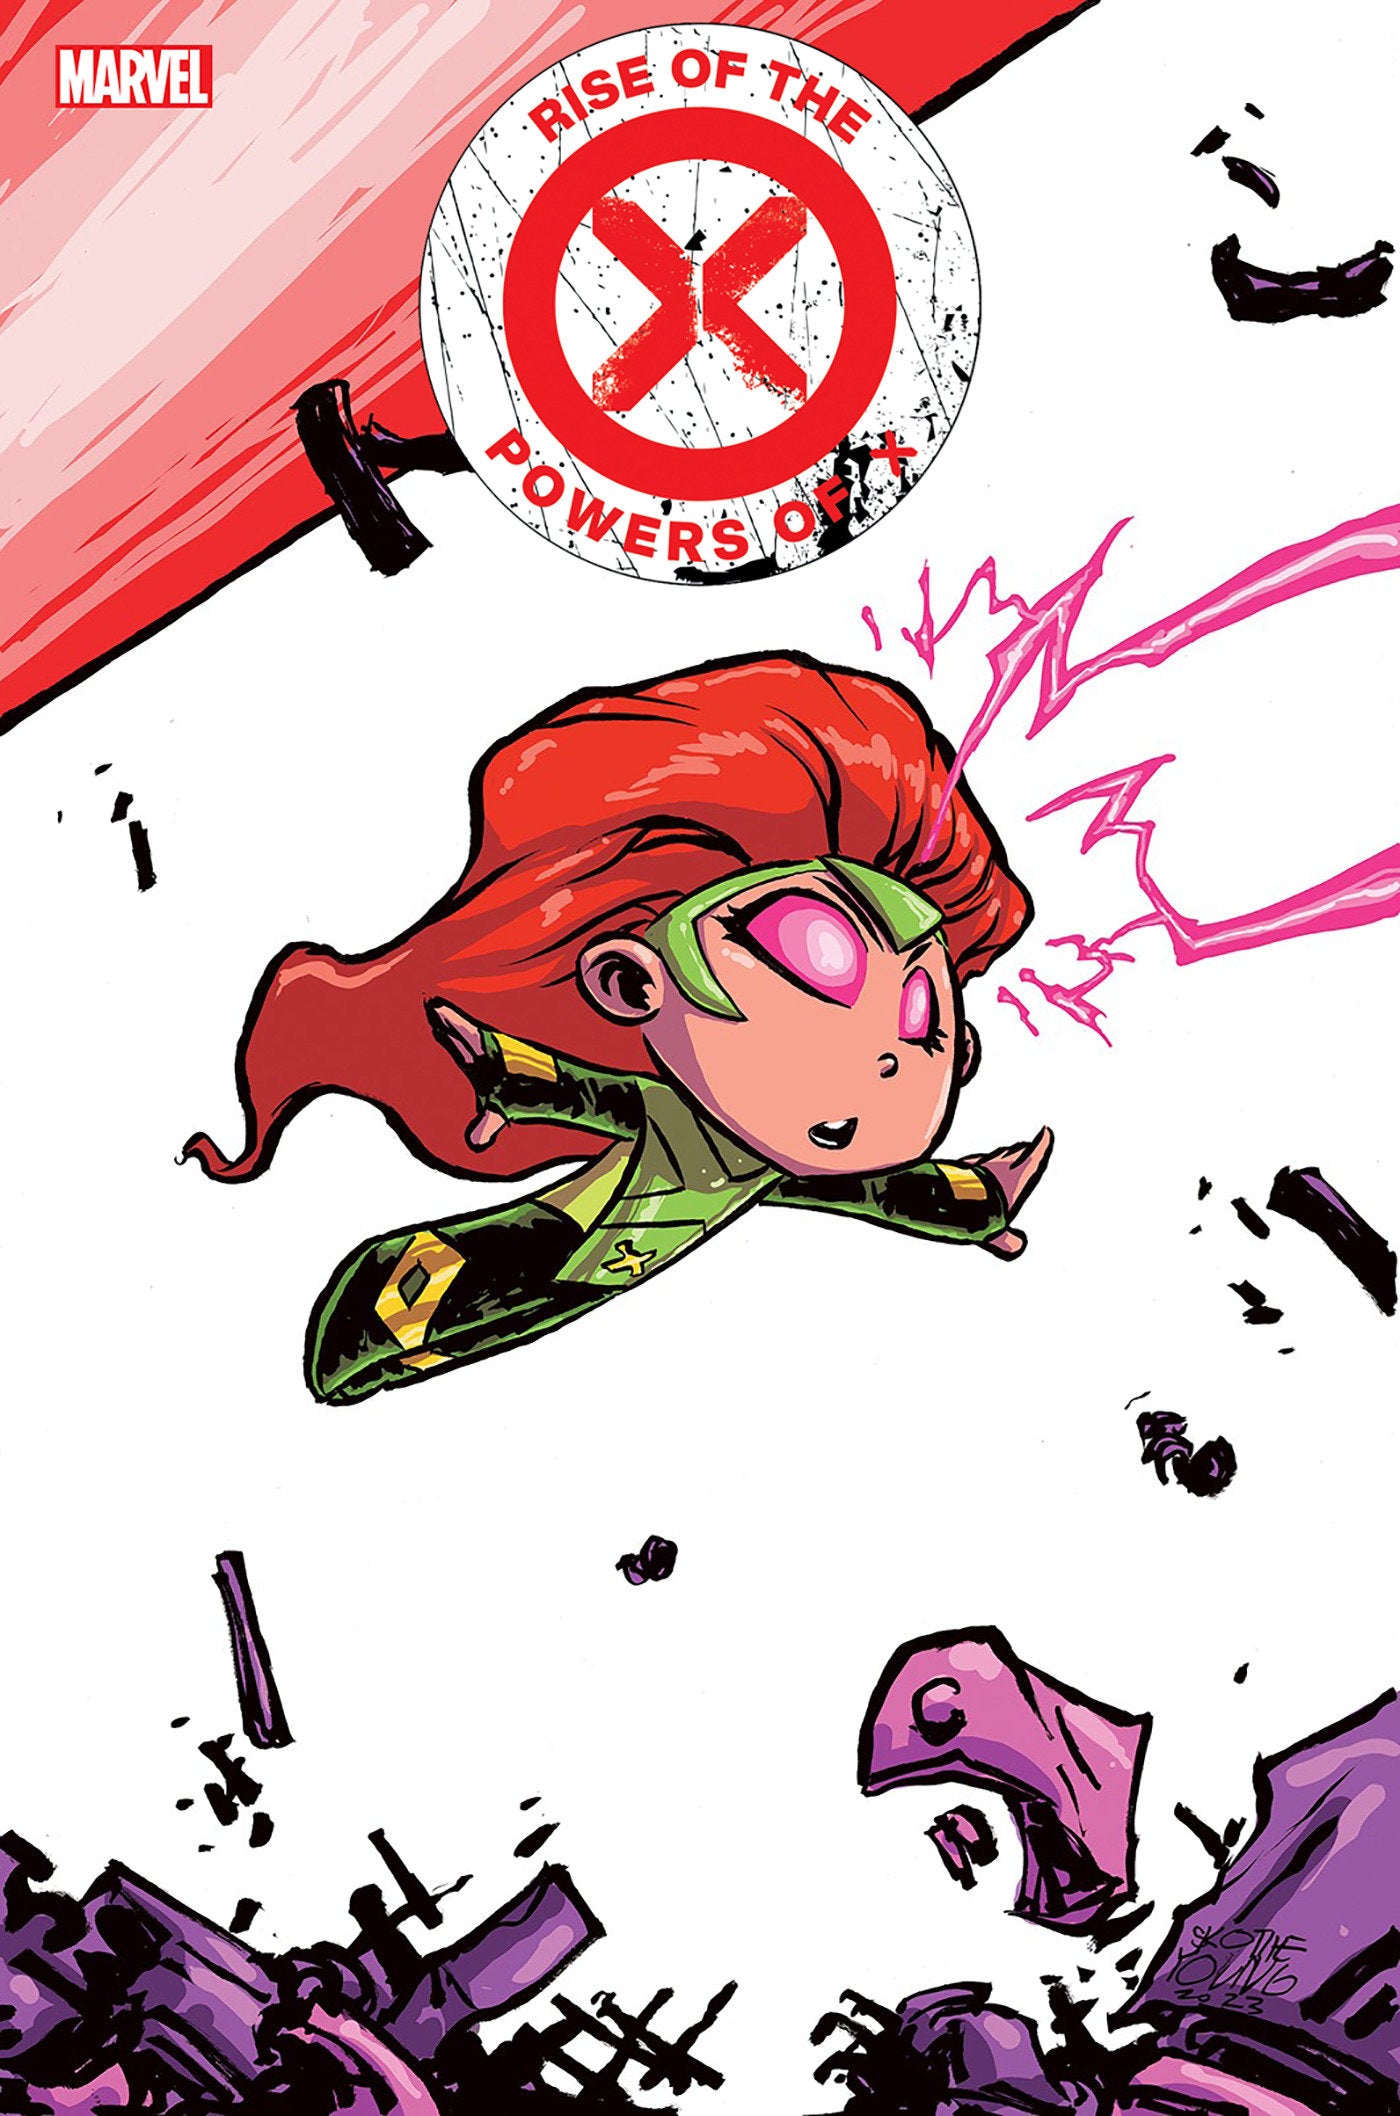 RISE OF THE POWERS OF X #1 SKOTTIE YOUNG VAR (10 Jan)